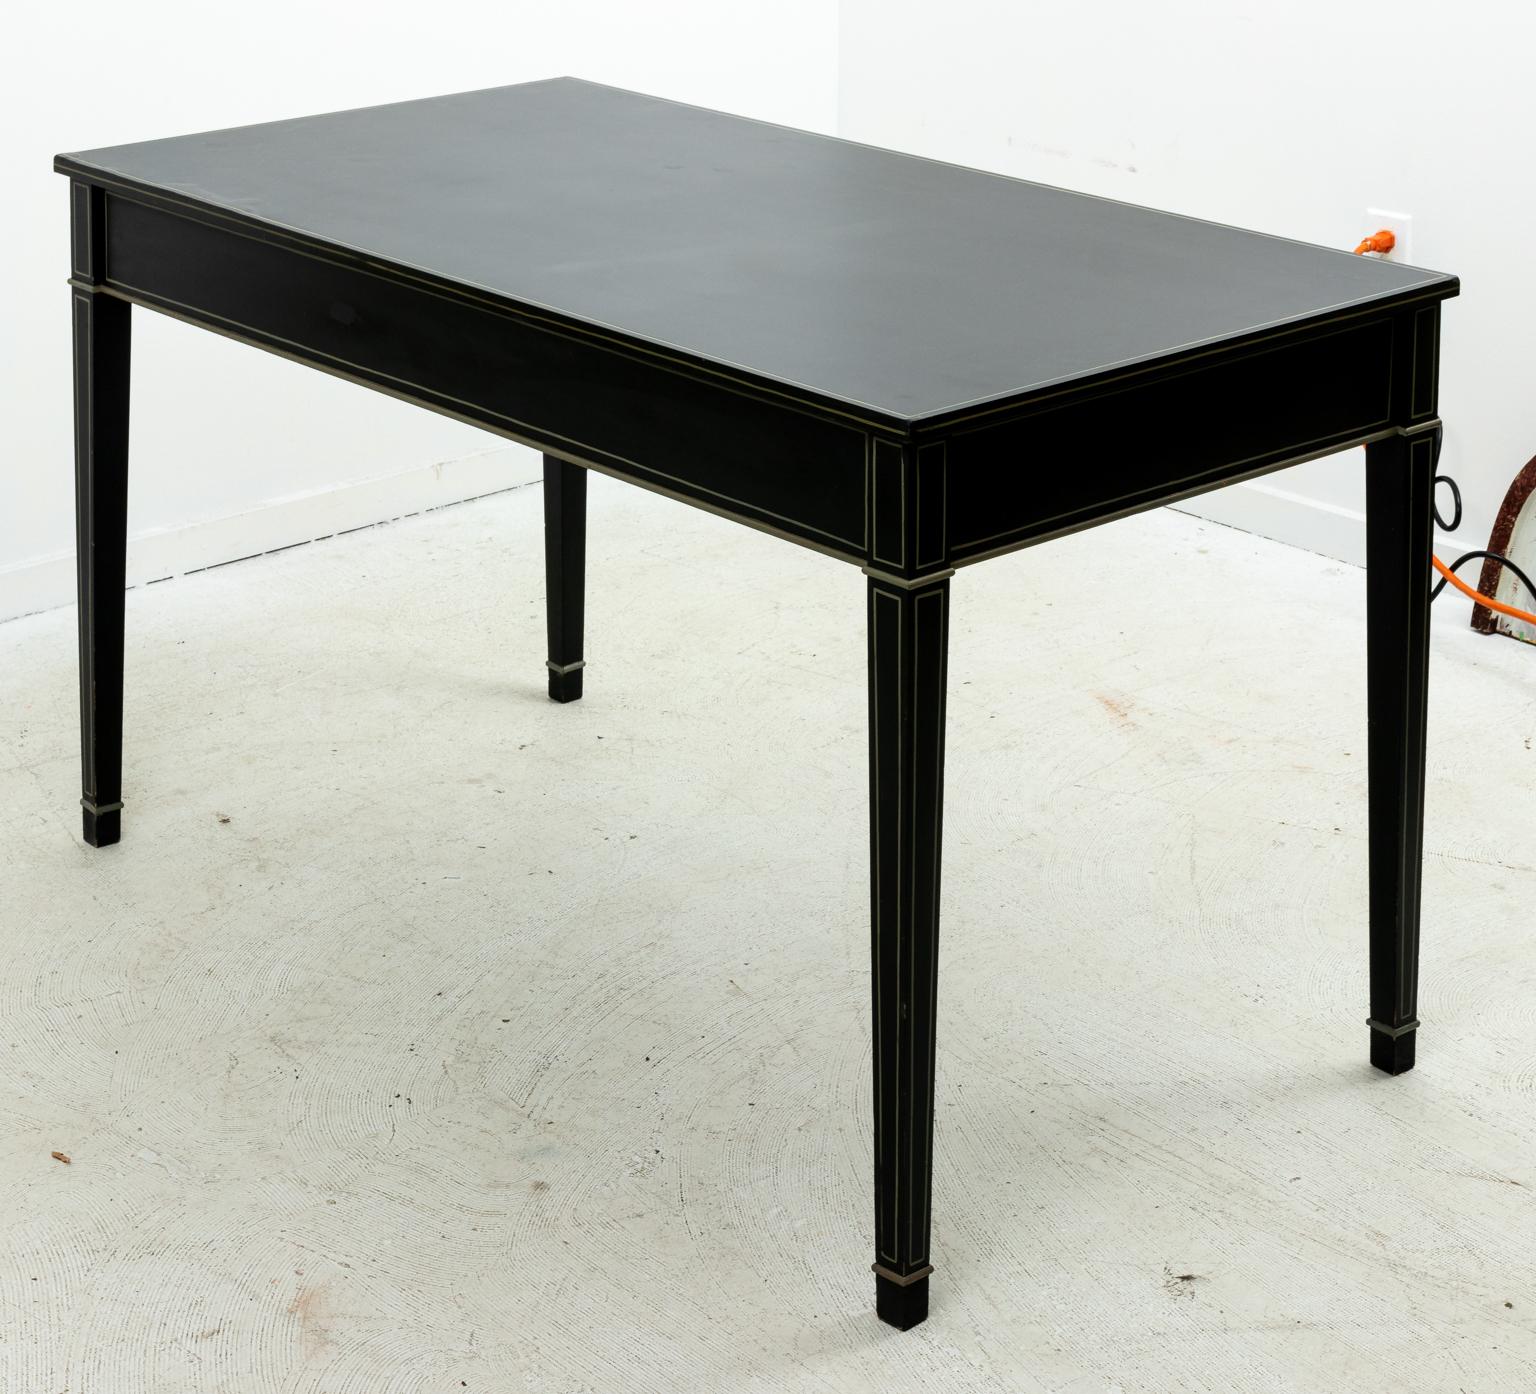 Black lacquer writing desk made for the George Smith showroom by Sudley Castle furniture, circa 1990s. Made in England. Please note of wear consistent with age as seen on the tabletop with slight bubbling.